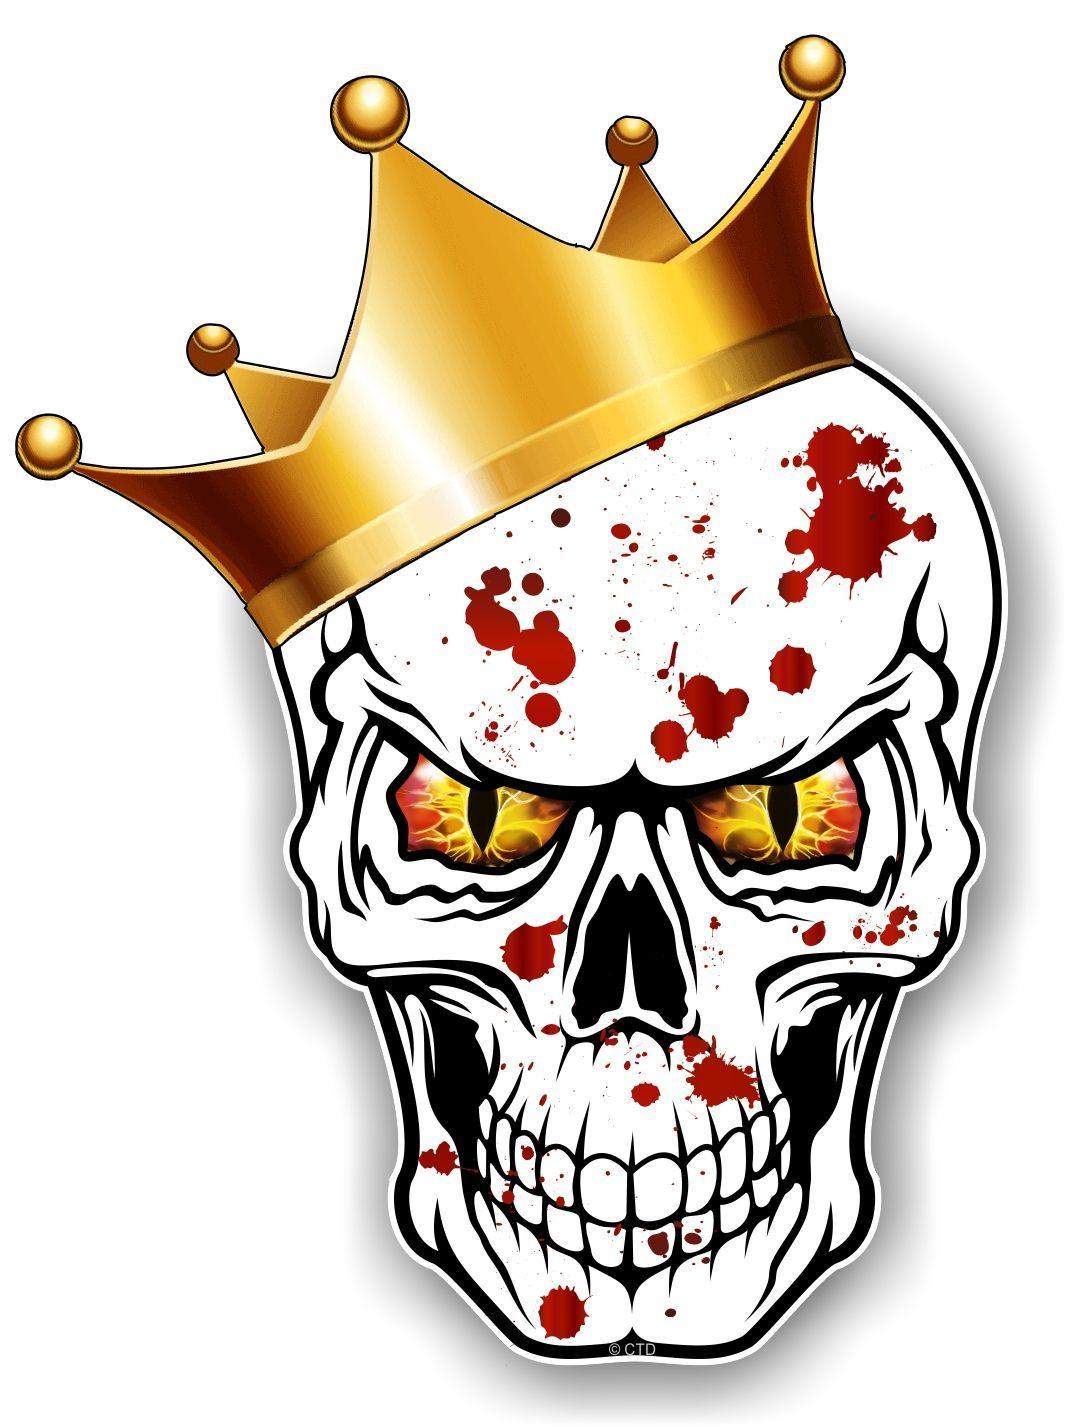 Red and Yellow B with Crown Logo - GOTHIC King of SKULL Skulls With RED & YELLOW Evil Eyes and Crown